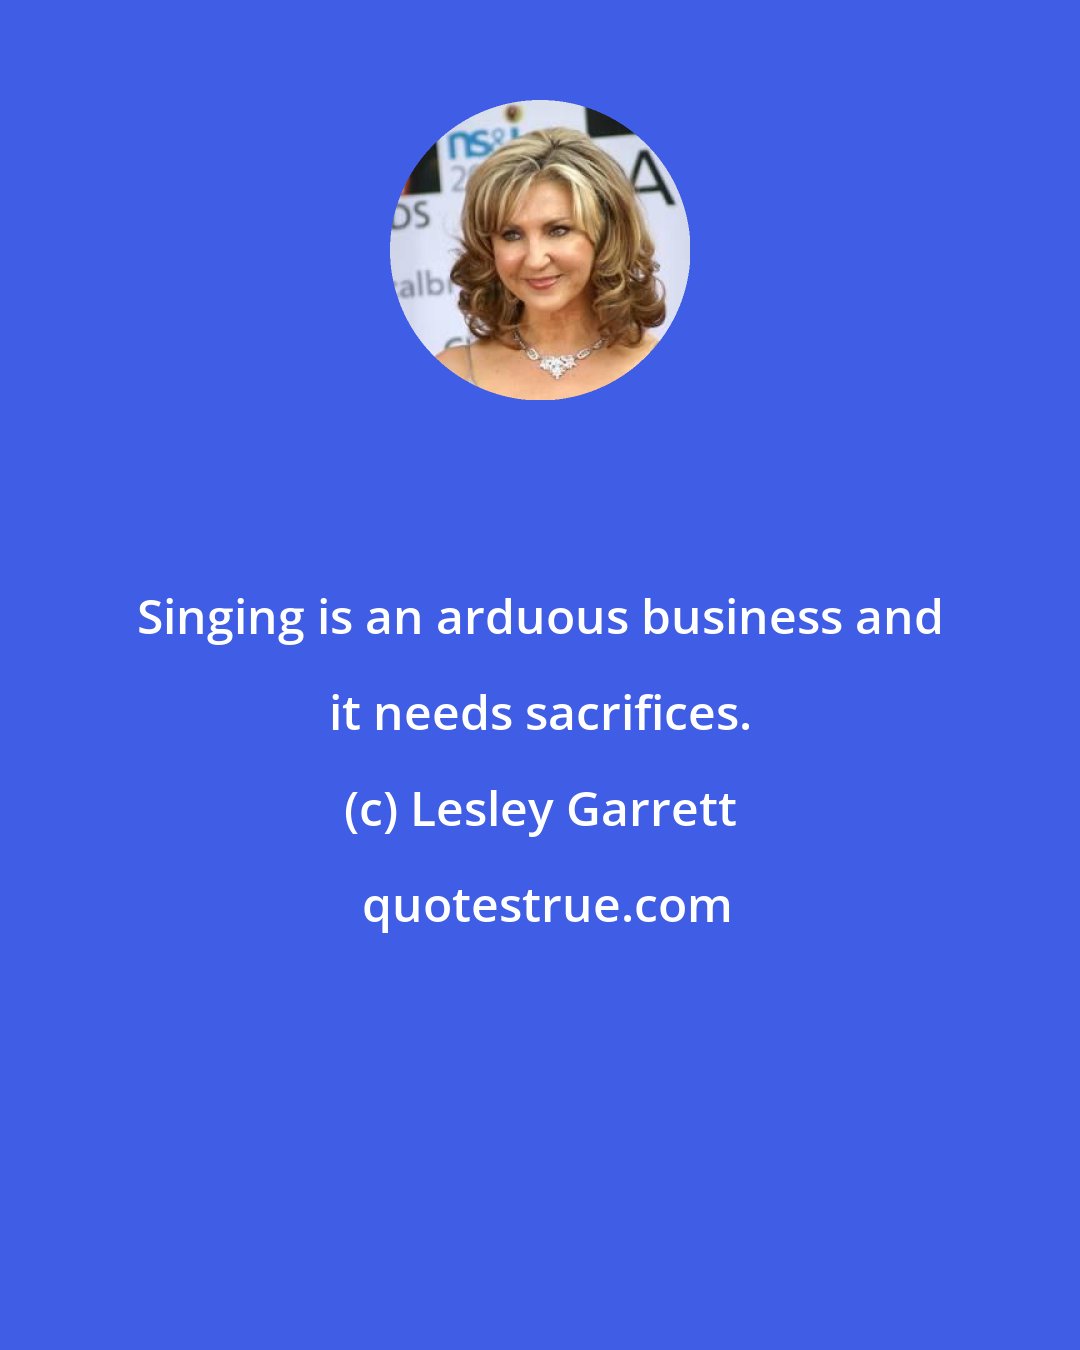 Lesley Garrett: Singing is an arduous business and it needs sacrifices.